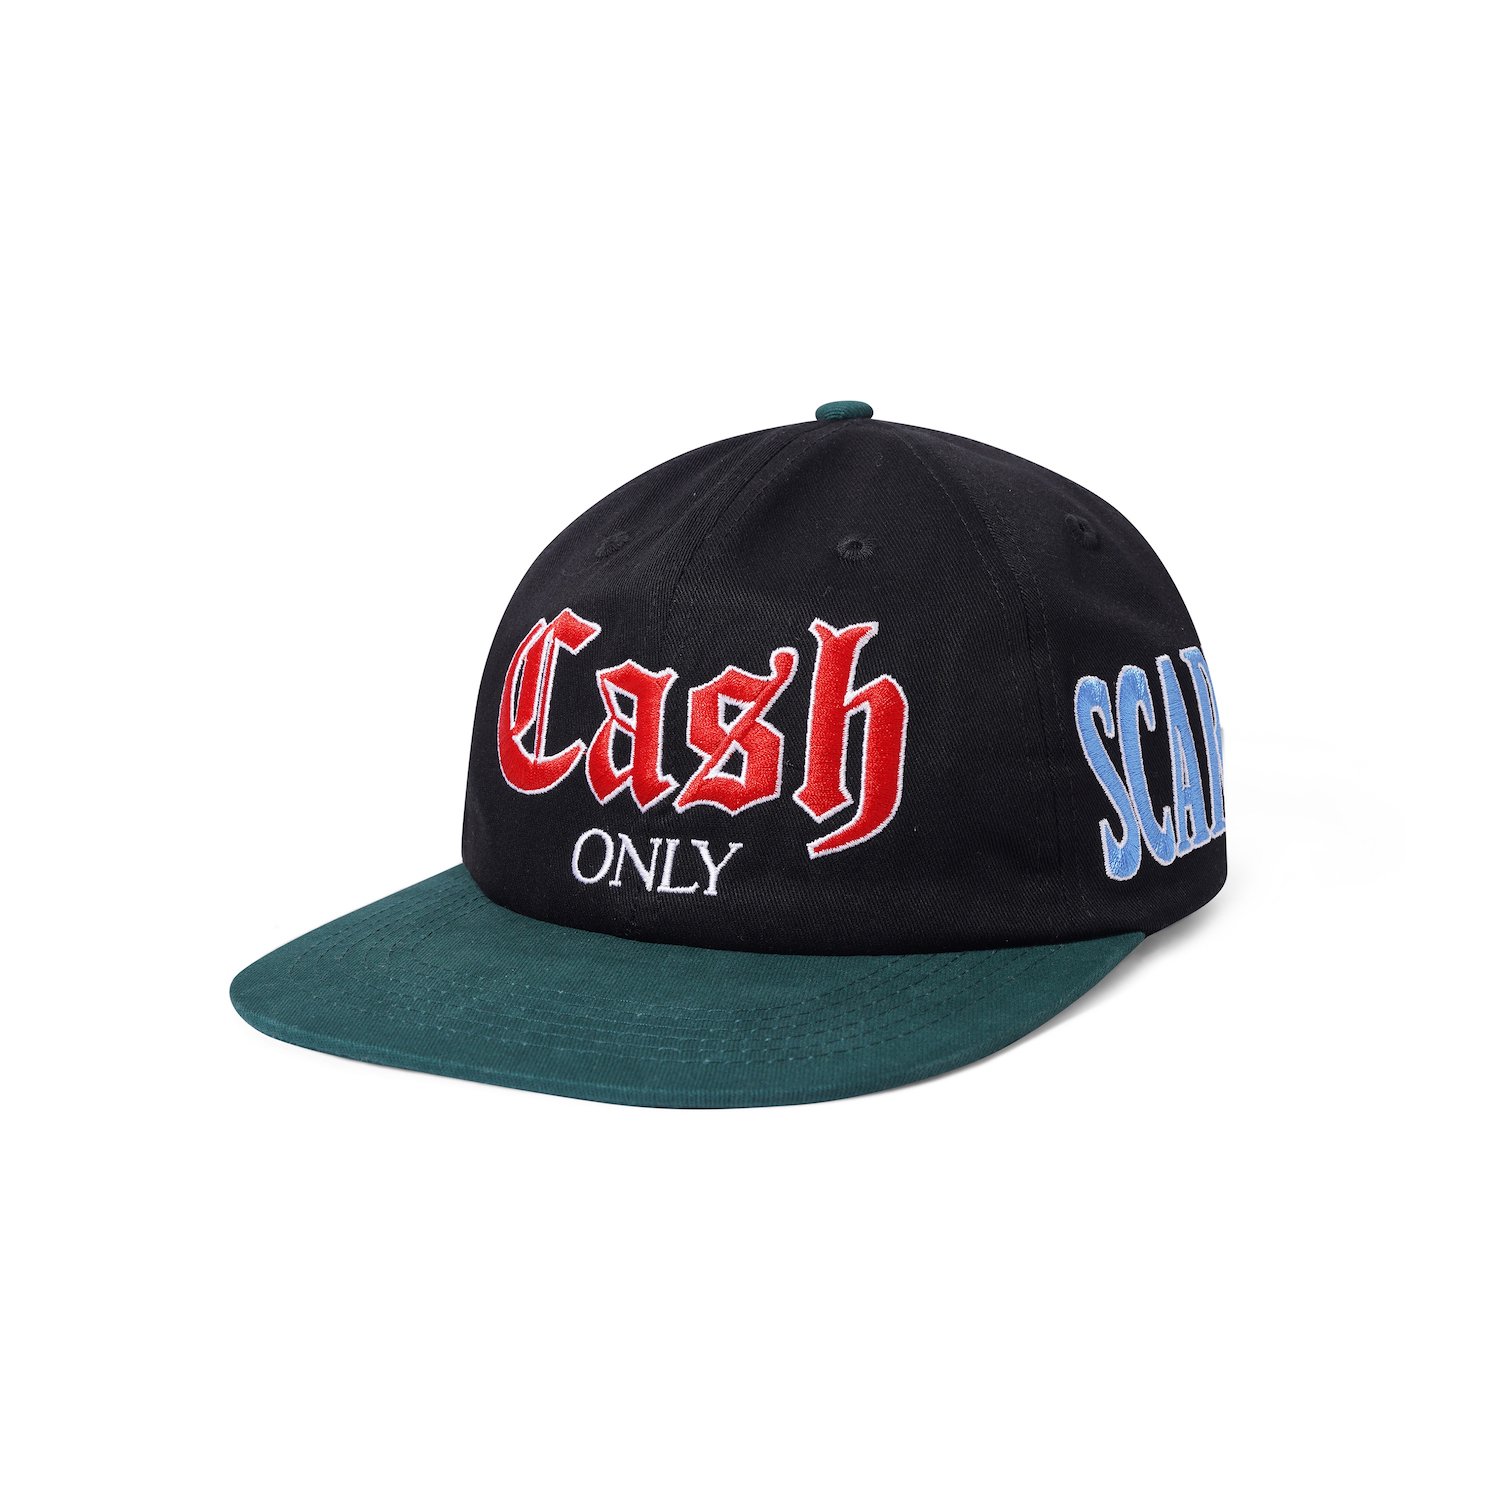 Cash Only<br>Training 6 Panel Cap<br>